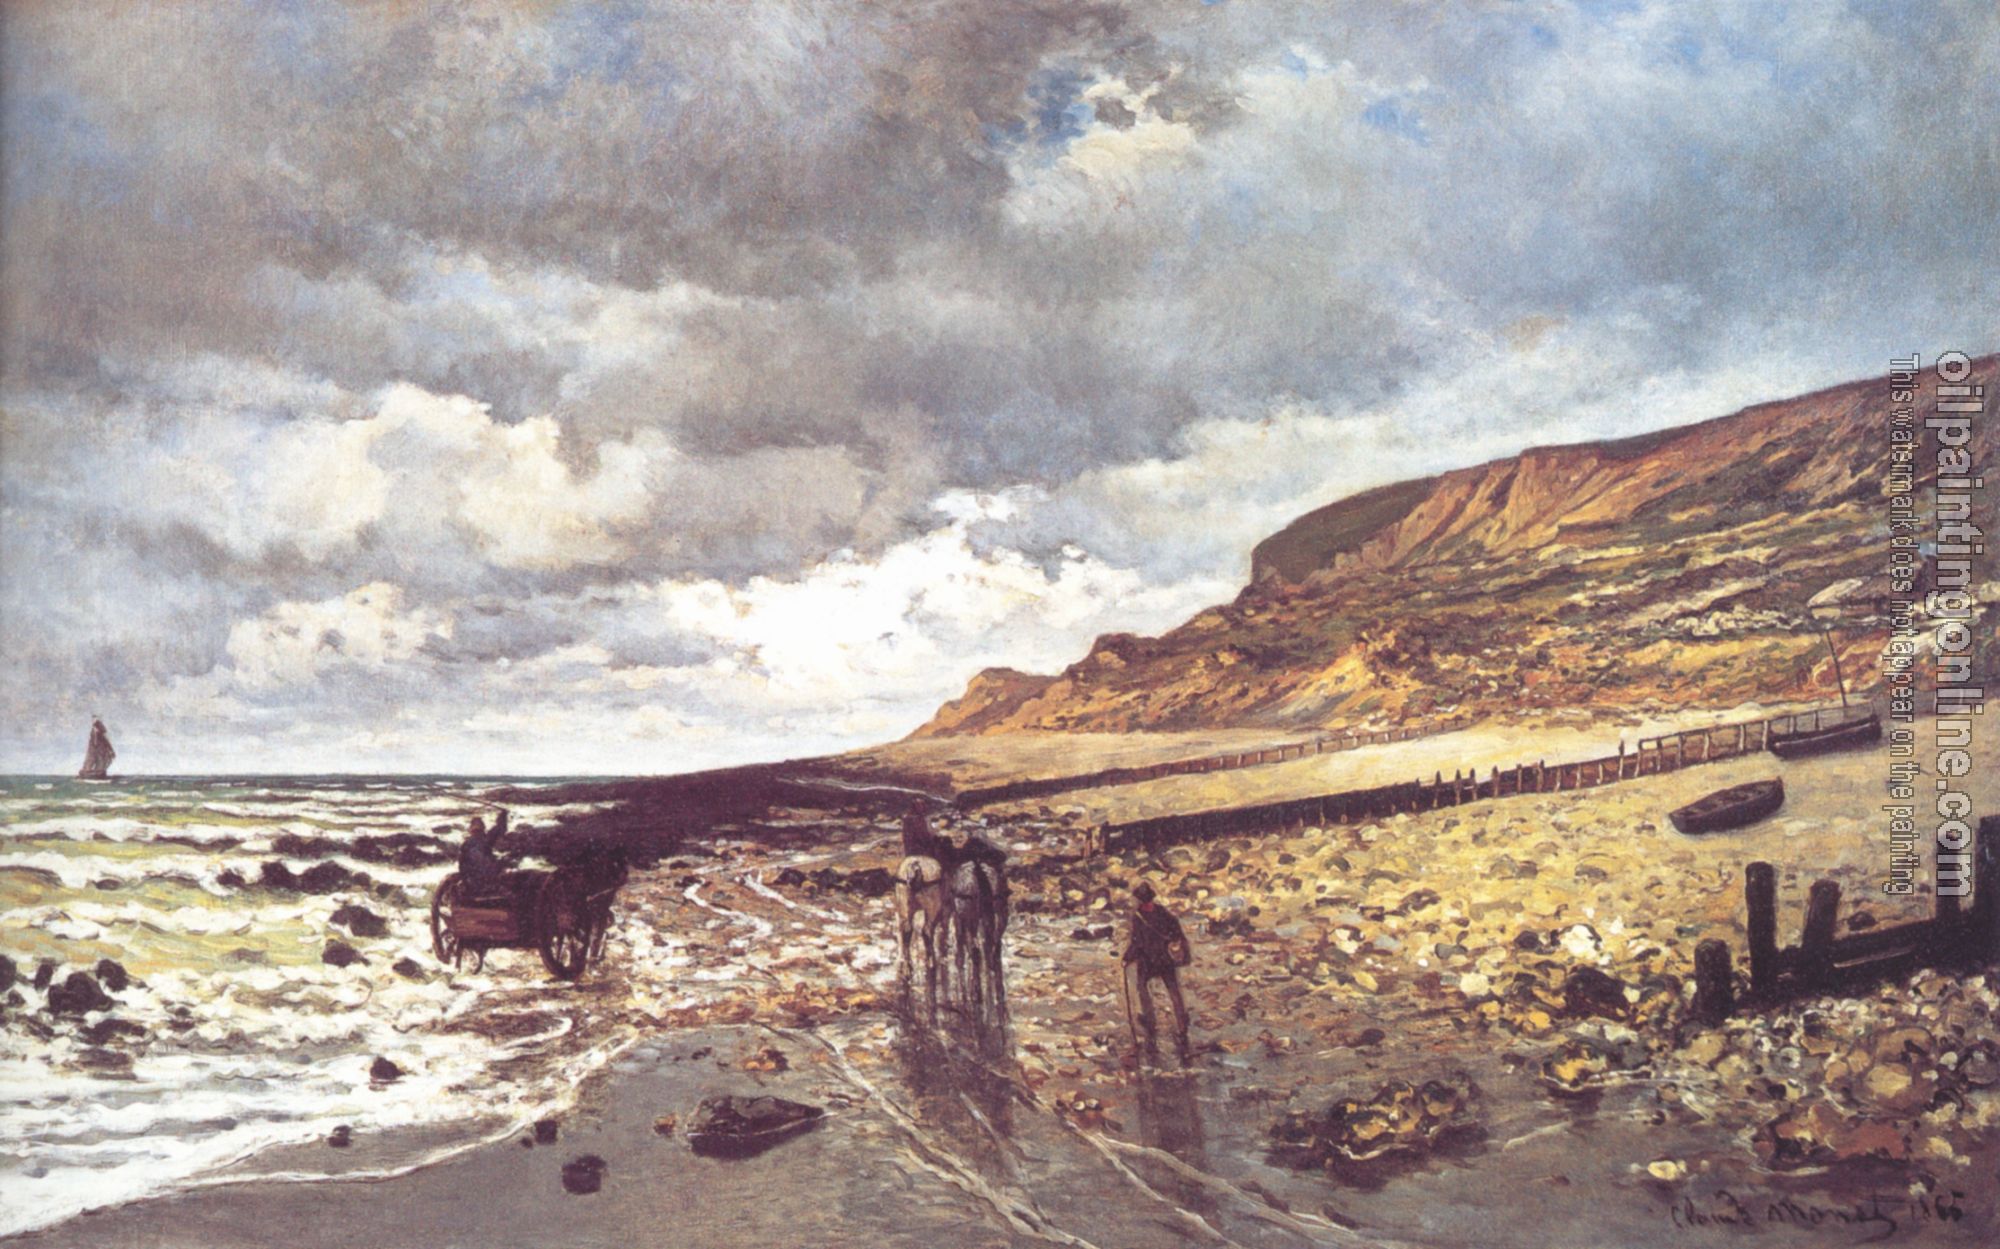 Monet, Claude Oscar - The Headland of the Heve at Low Tide